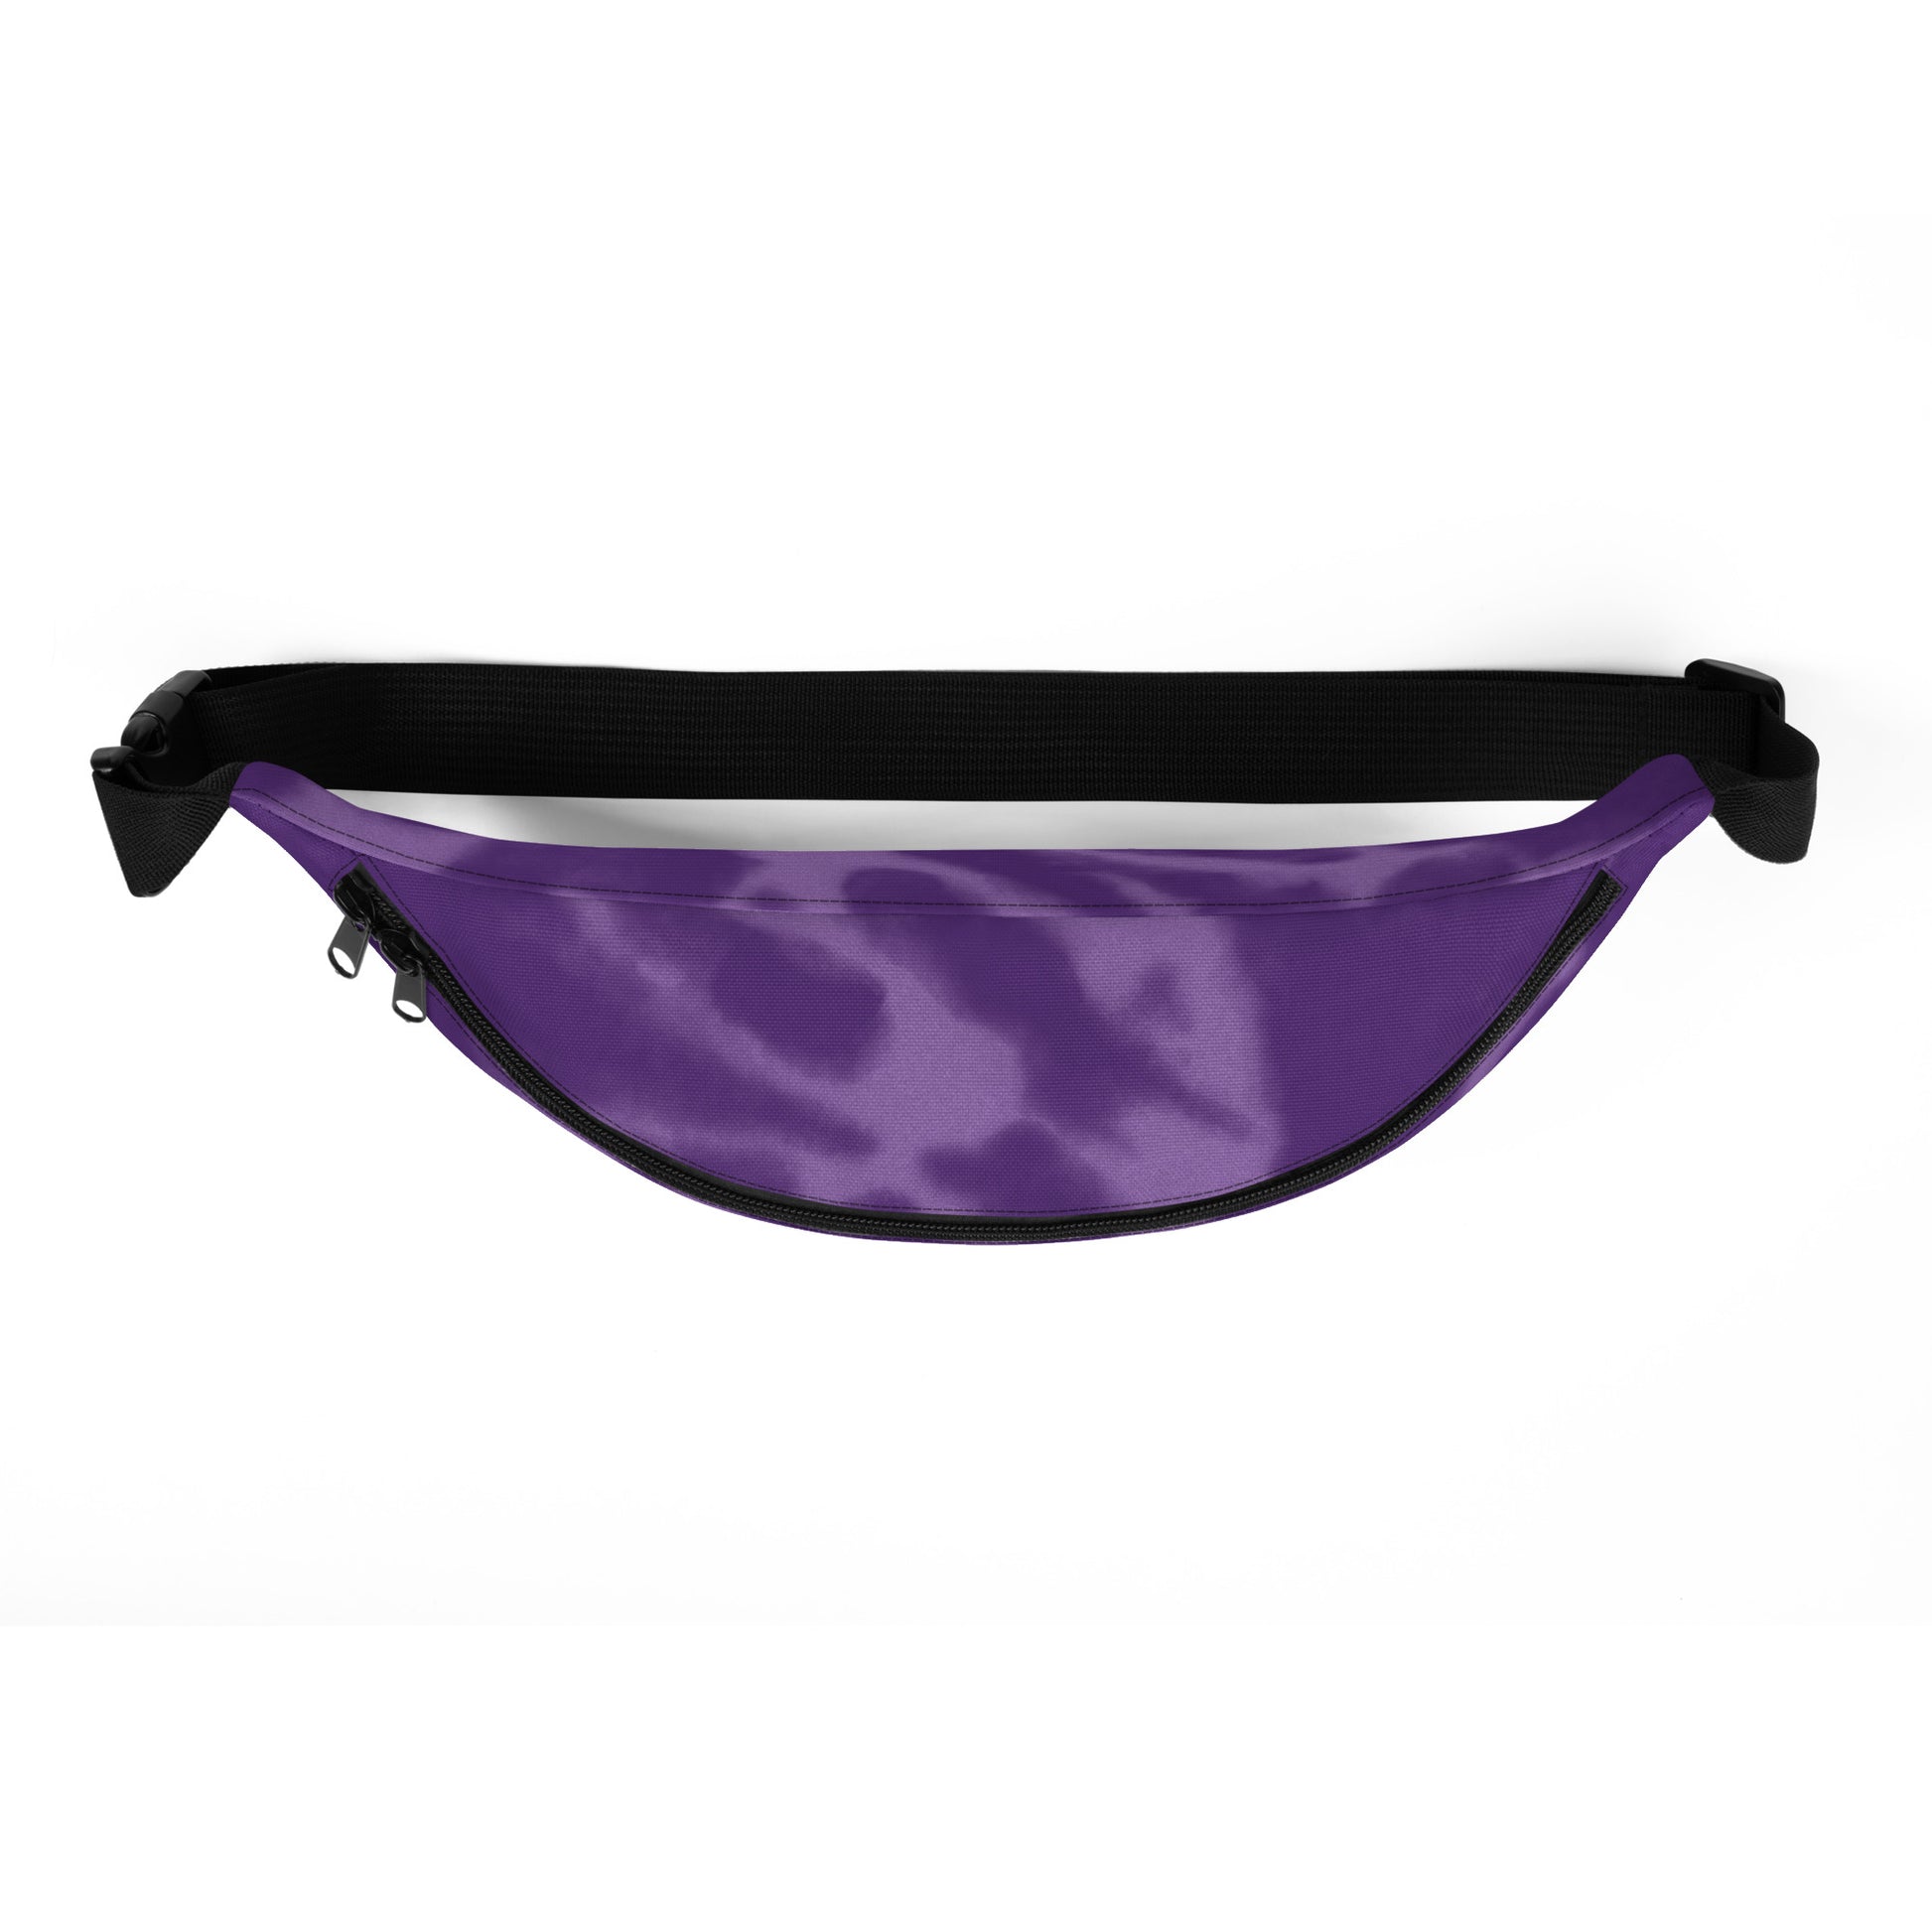 Travel Gift Fanny Pack - Purple Tie-Dye • YUL Montreal • YHM Designs - Image 08